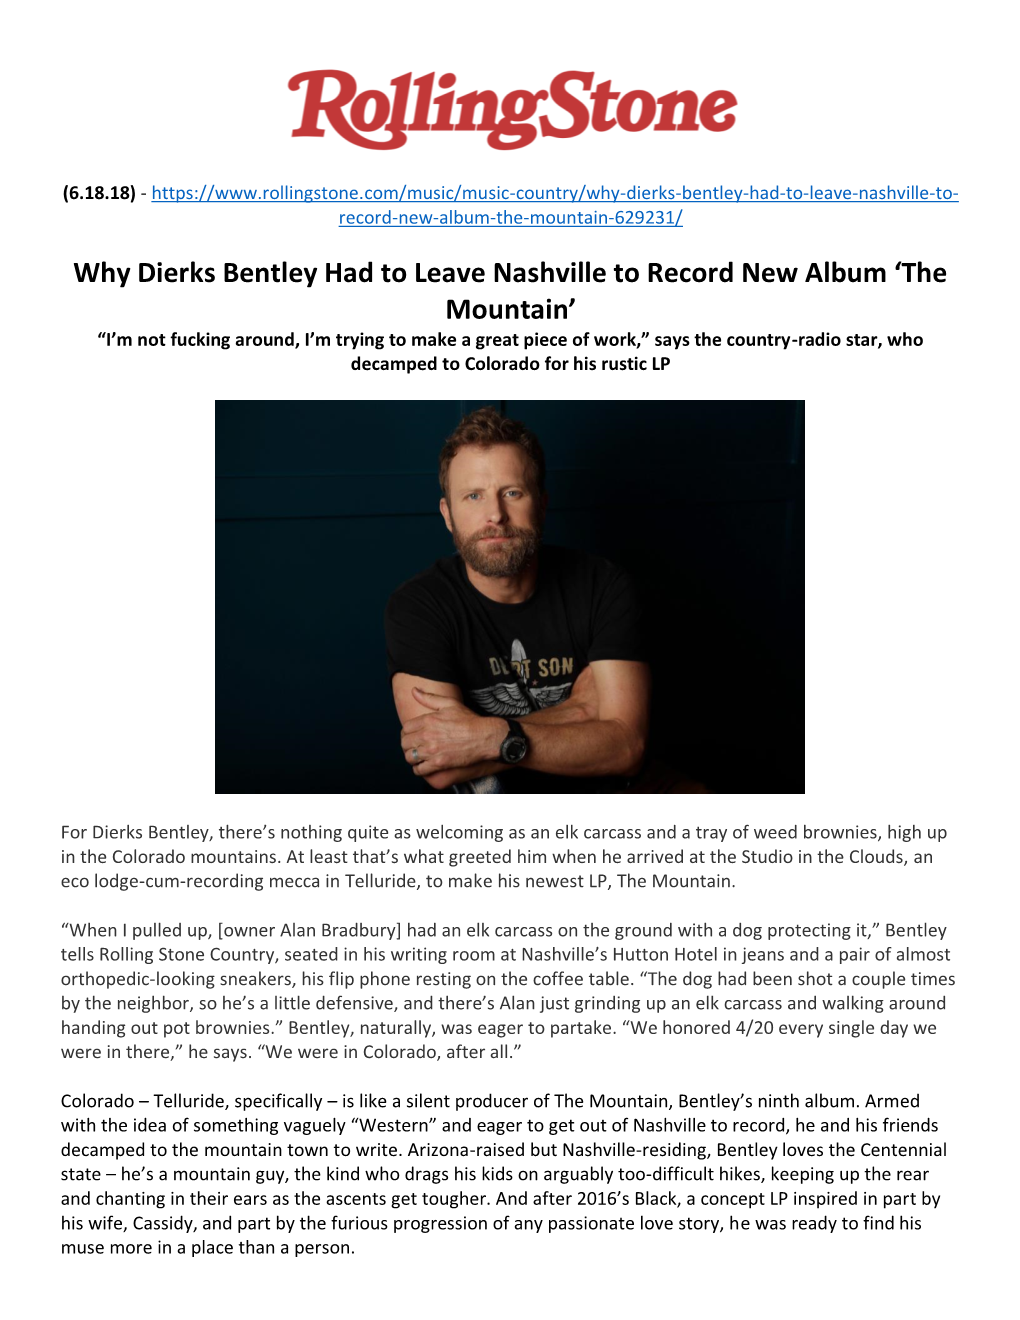 Why Dierks Bentley Had to Leave Nashville to Record New Album 'The Mountain'